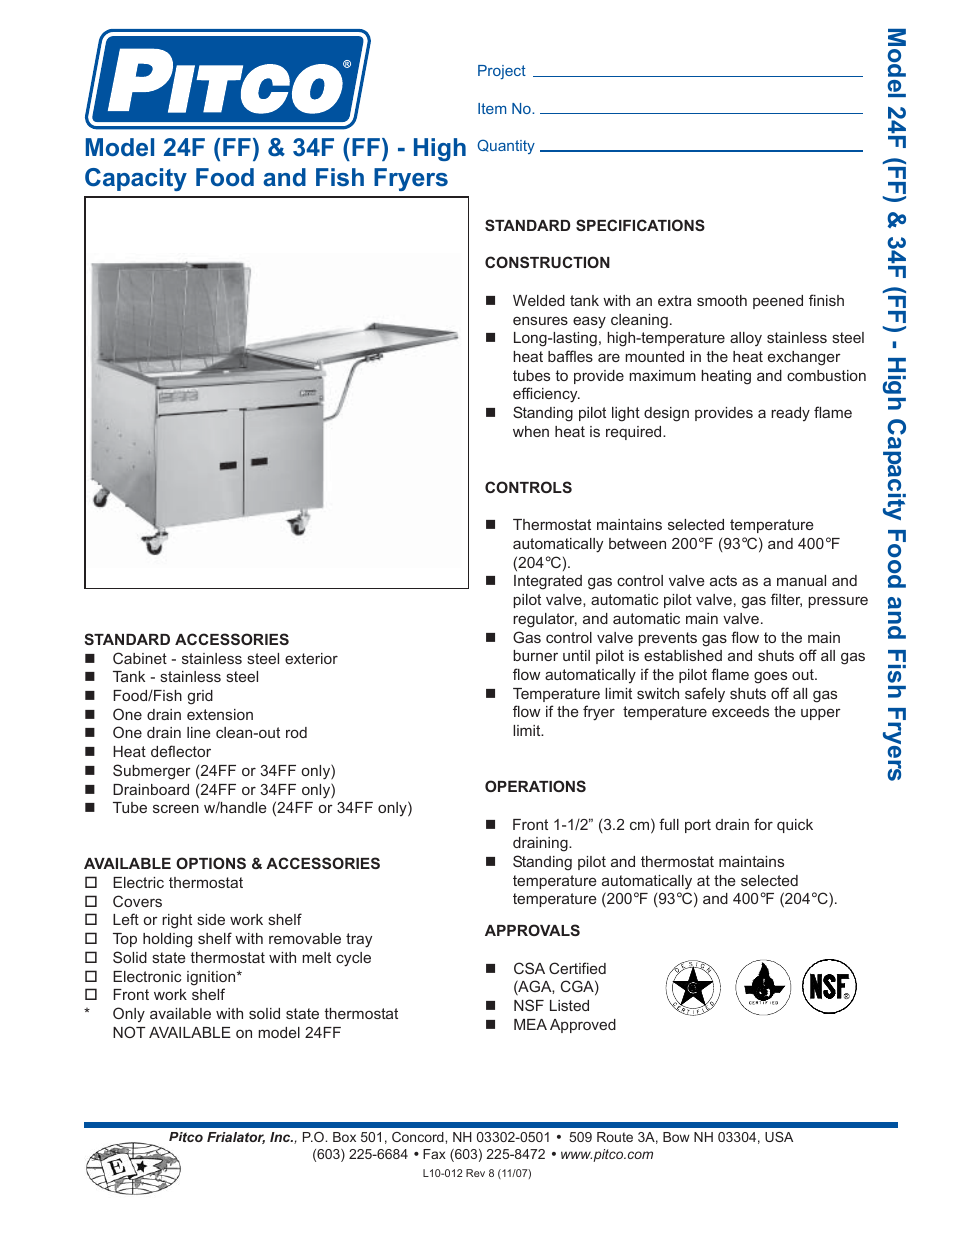 High Capacity Food and Fish Fryers 24F (FF)